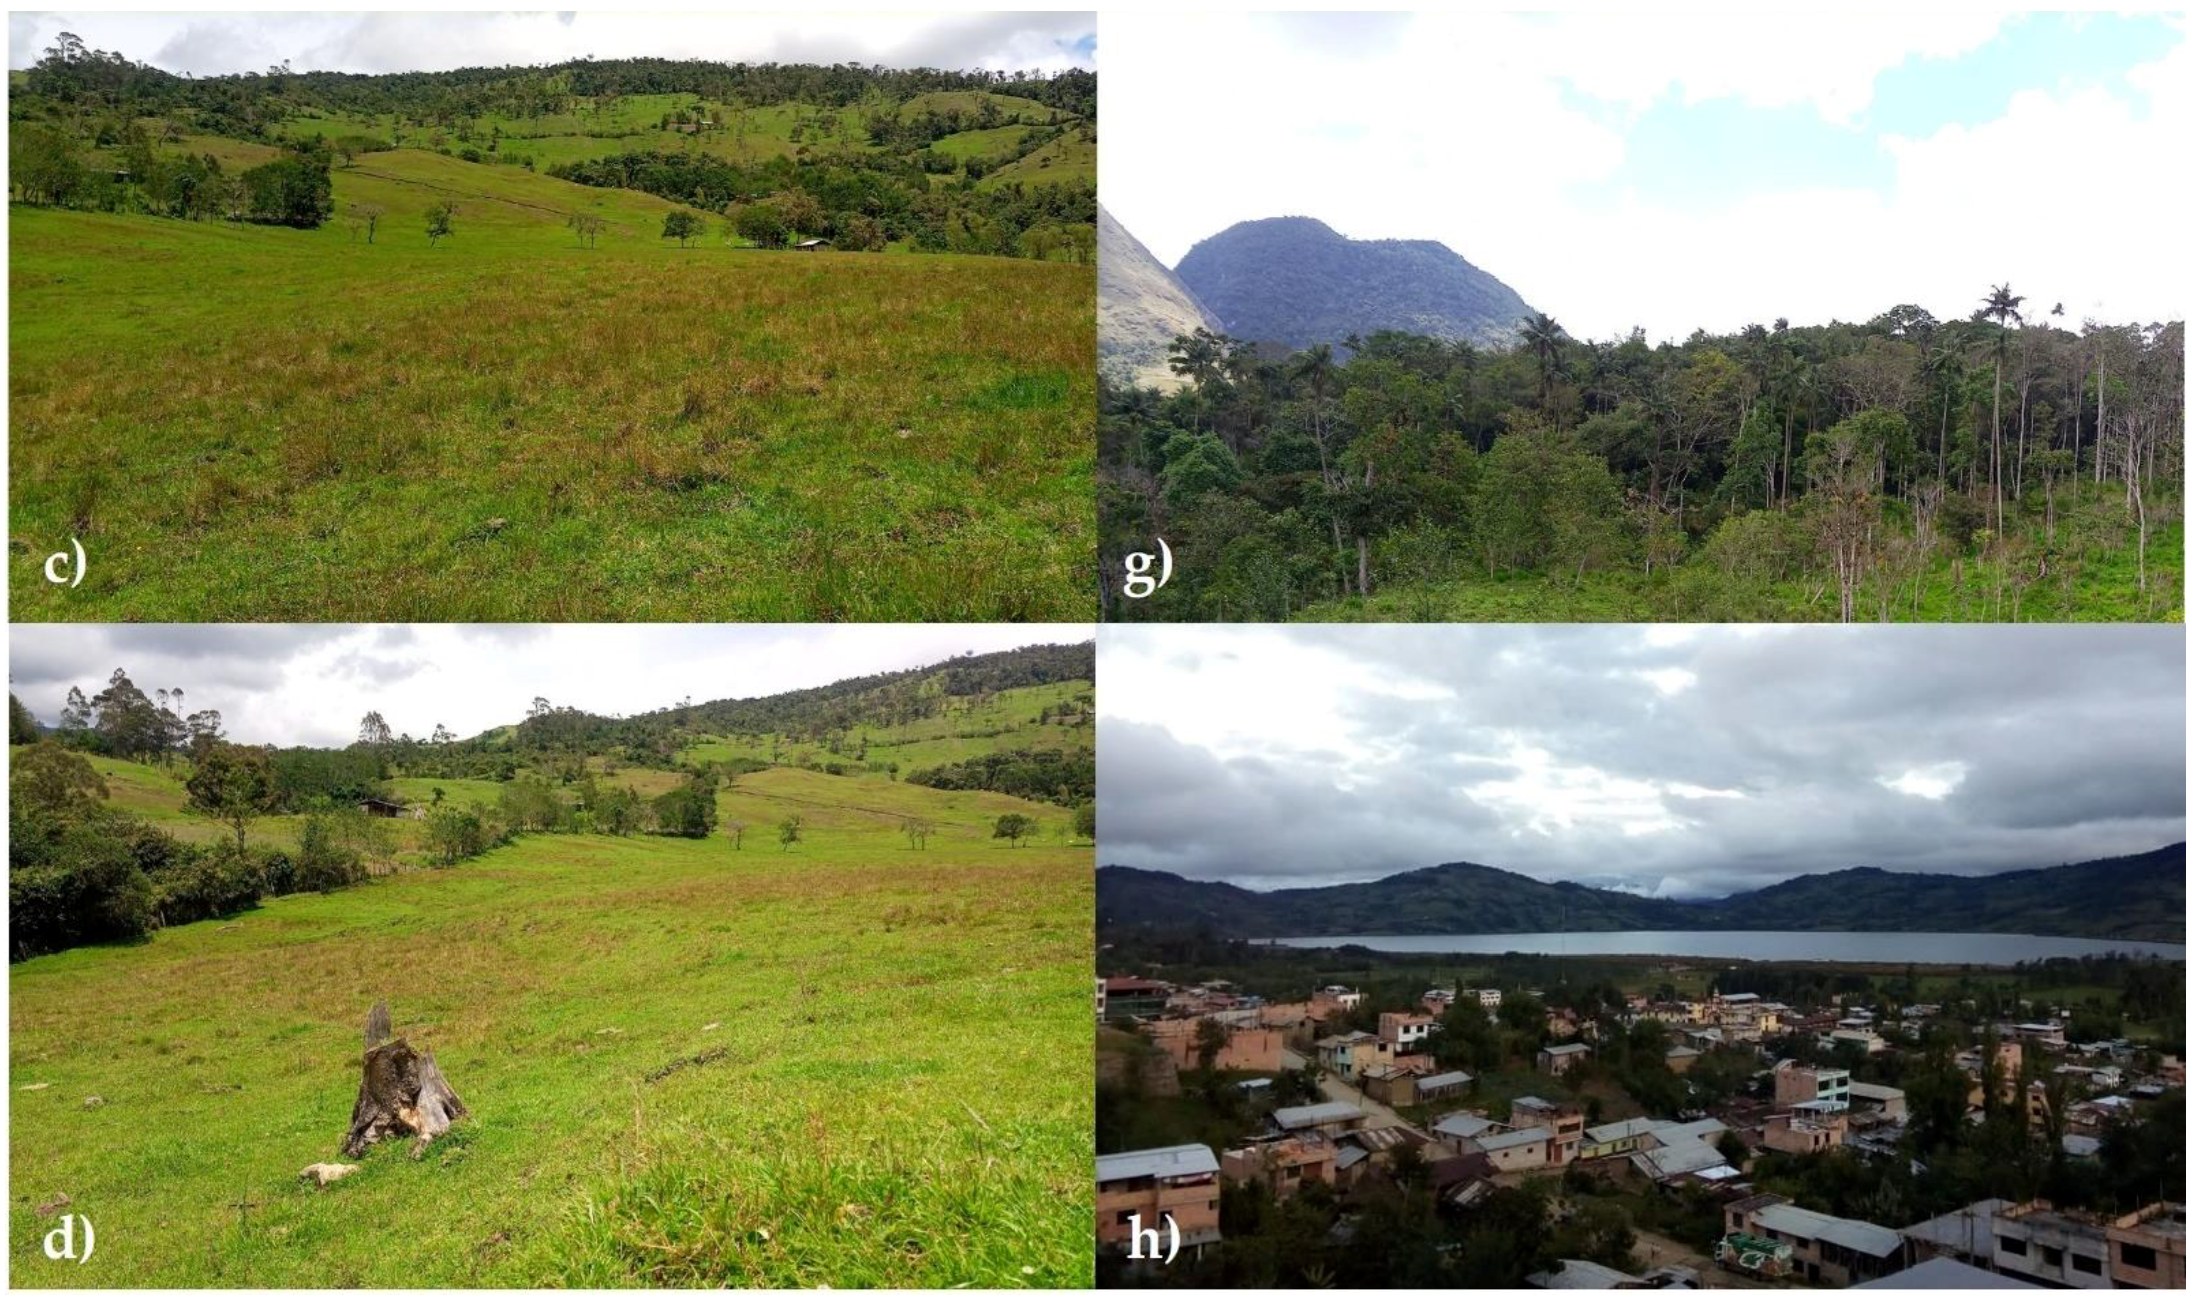 Land | Free Full-Text | Spatiotemporal Dynamics of Grasslands Using Landsat  Data in Livestock Micro-Watersheds in Amazonas (NW Peru)